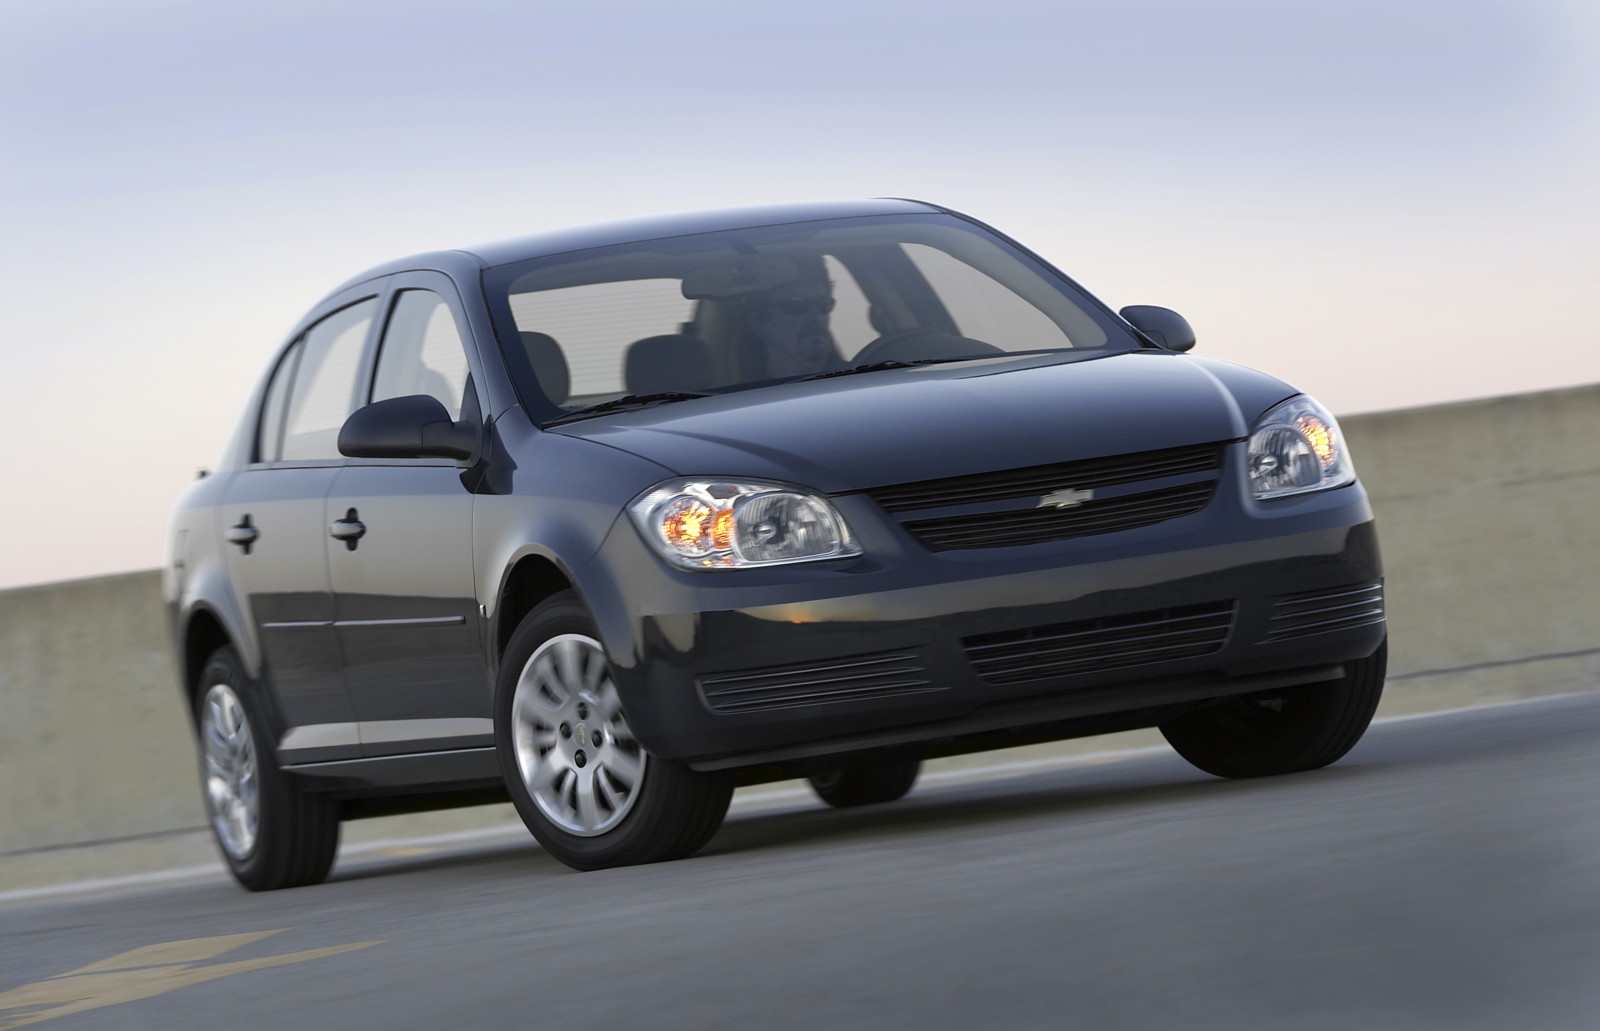 2010 Chevrolet Cobalt Review Prices, Specs, and Photos The Car